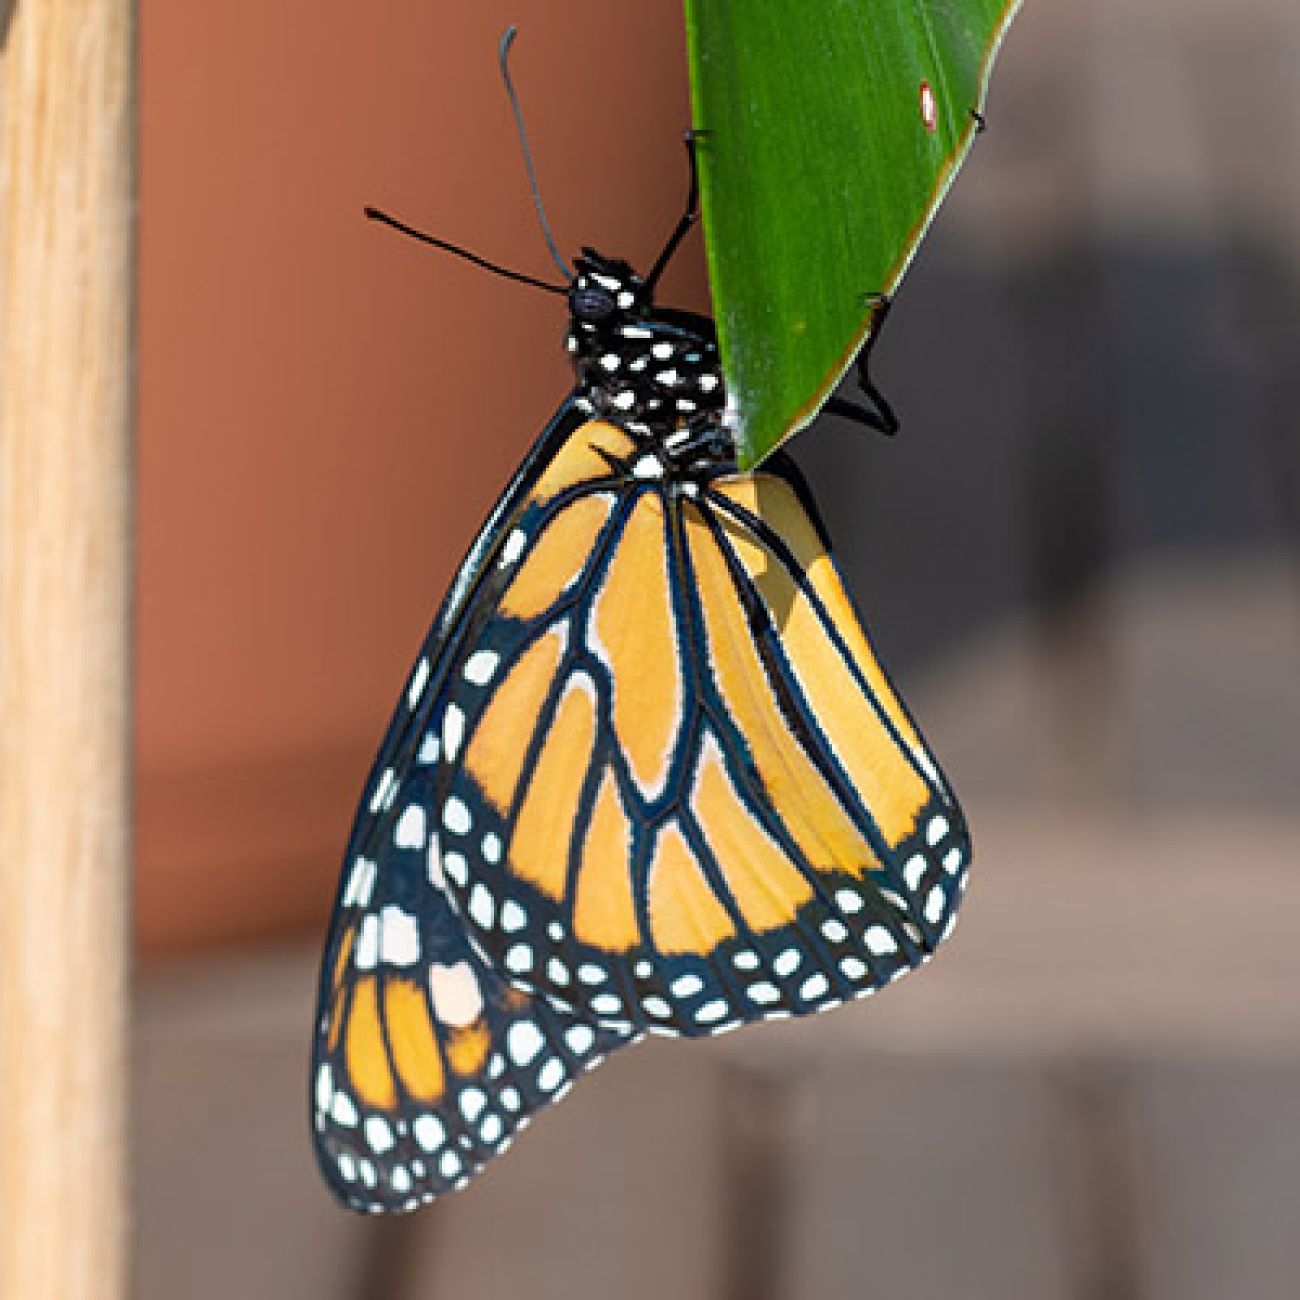 A monarch butterfly. It wings are orange and black with white spots